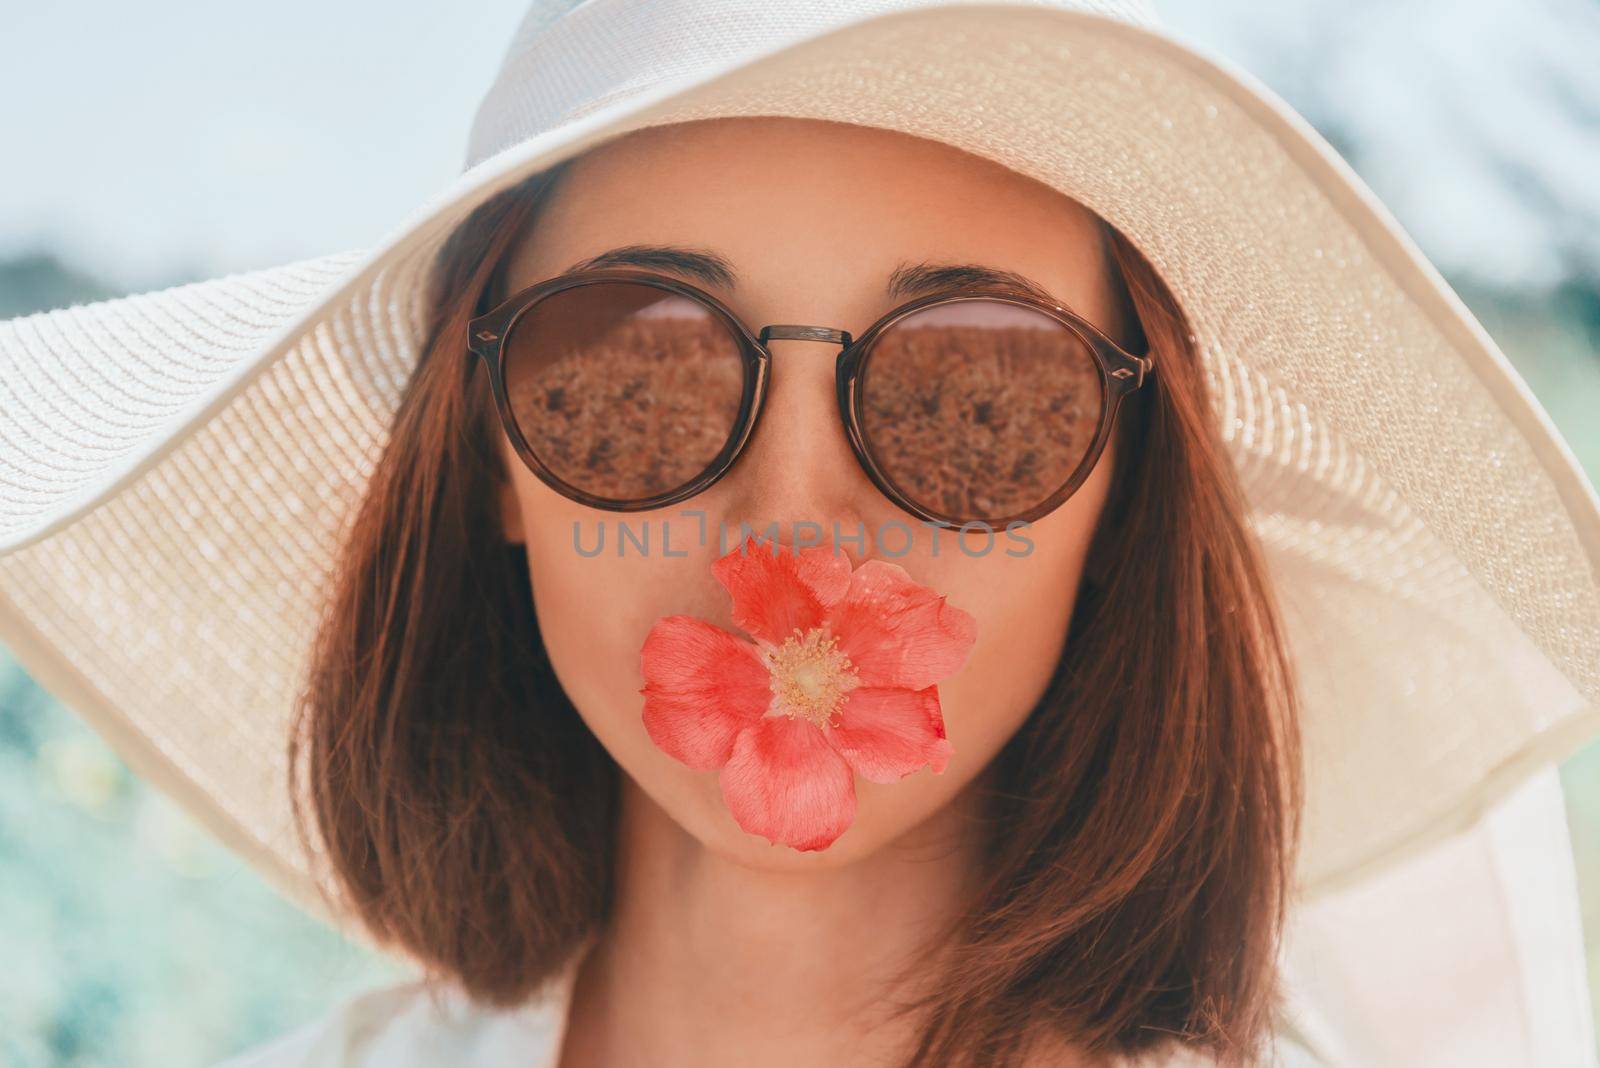 Portrait of young woman in sunglasses and hat with red flower, concept of summer mood. Fashionable and beautiful summer girl